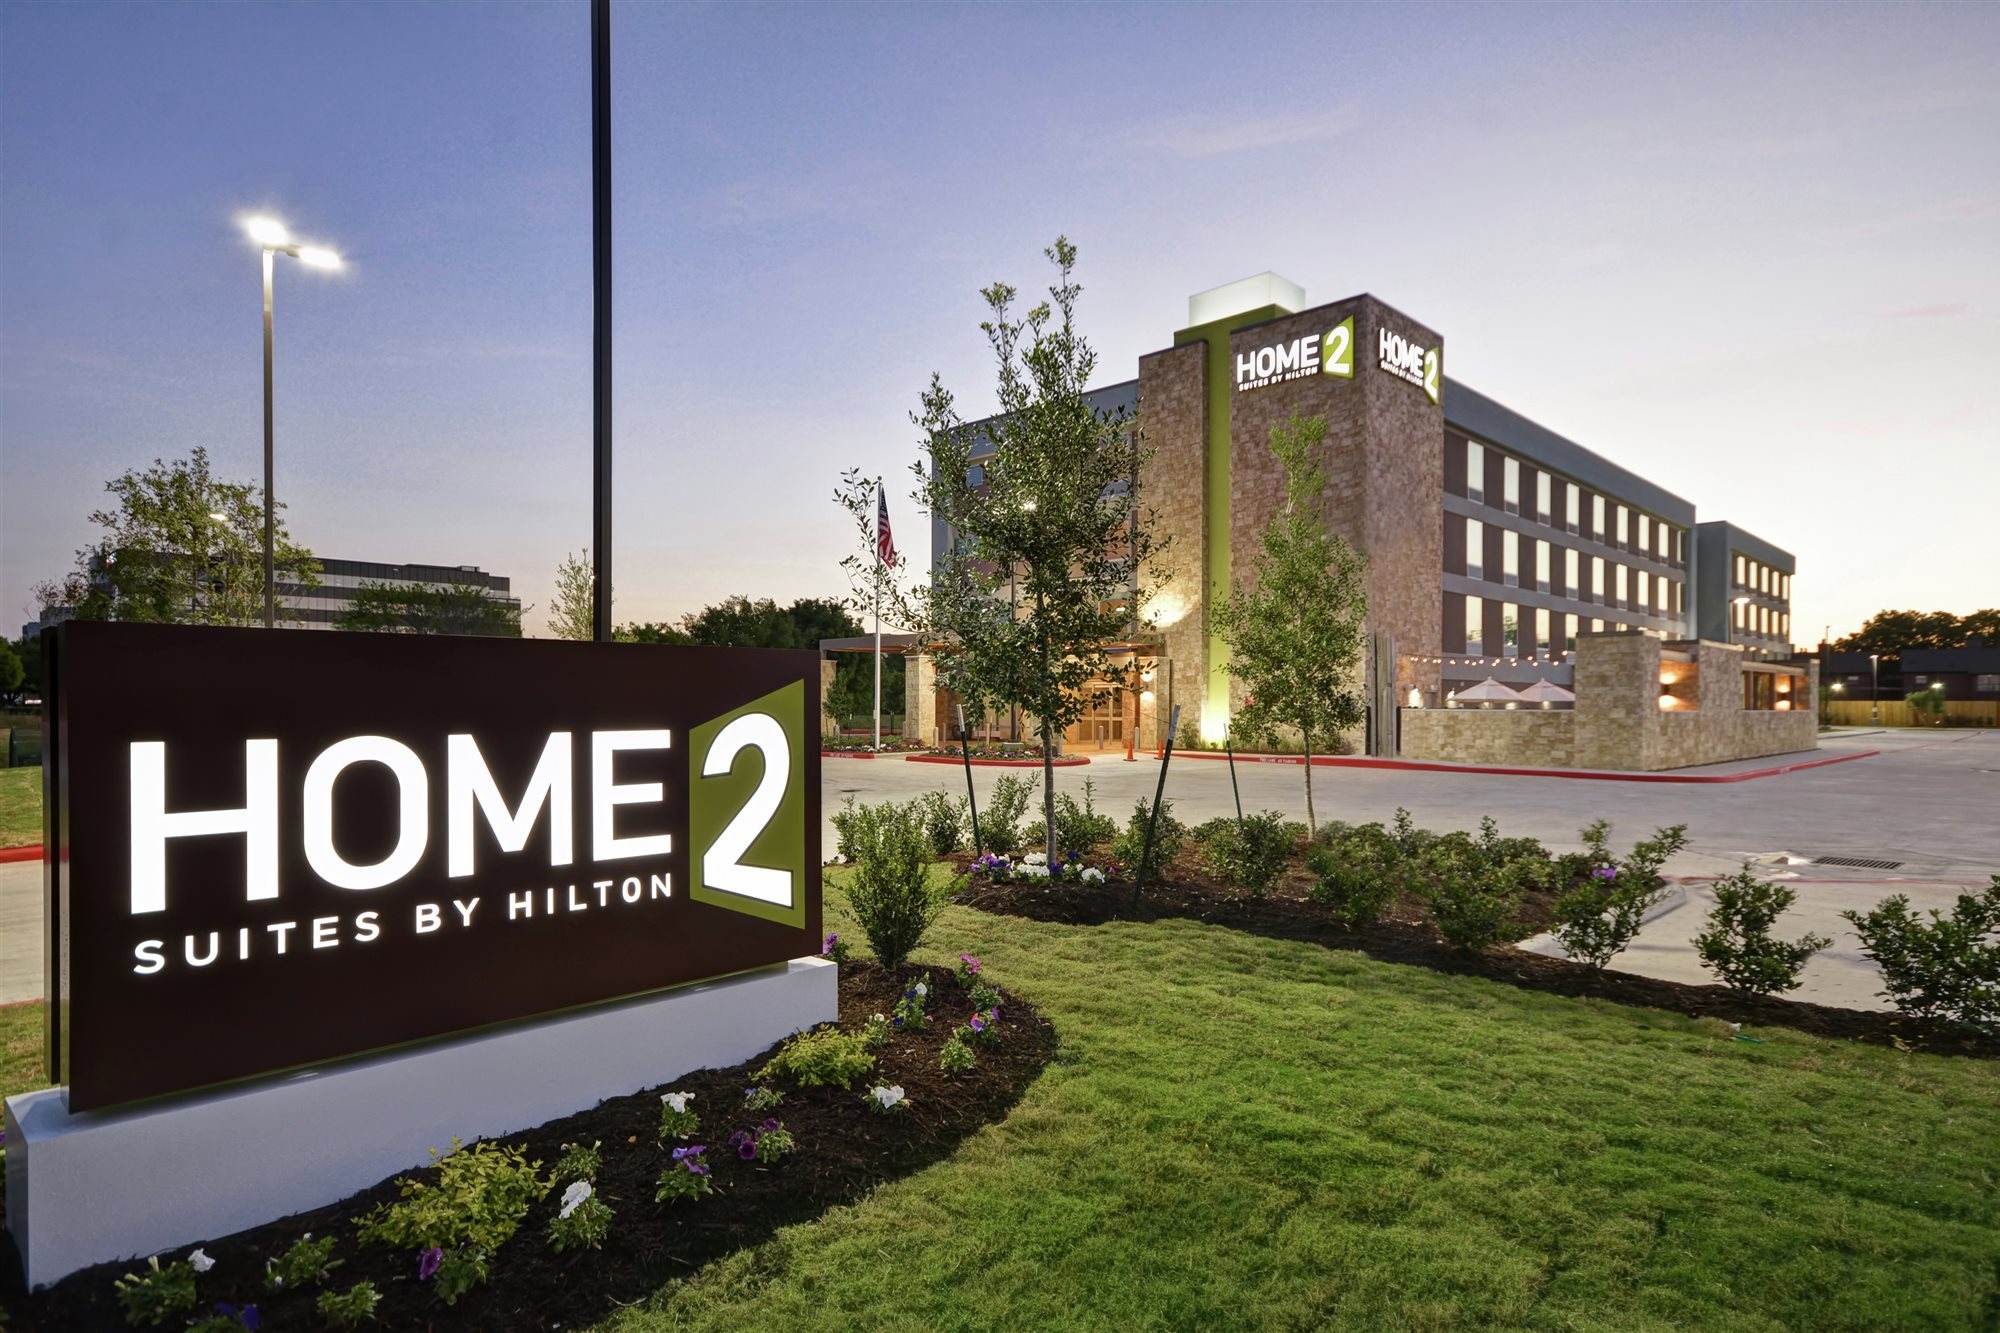 Home2 Suites by Hilton Houston Westchase, TX